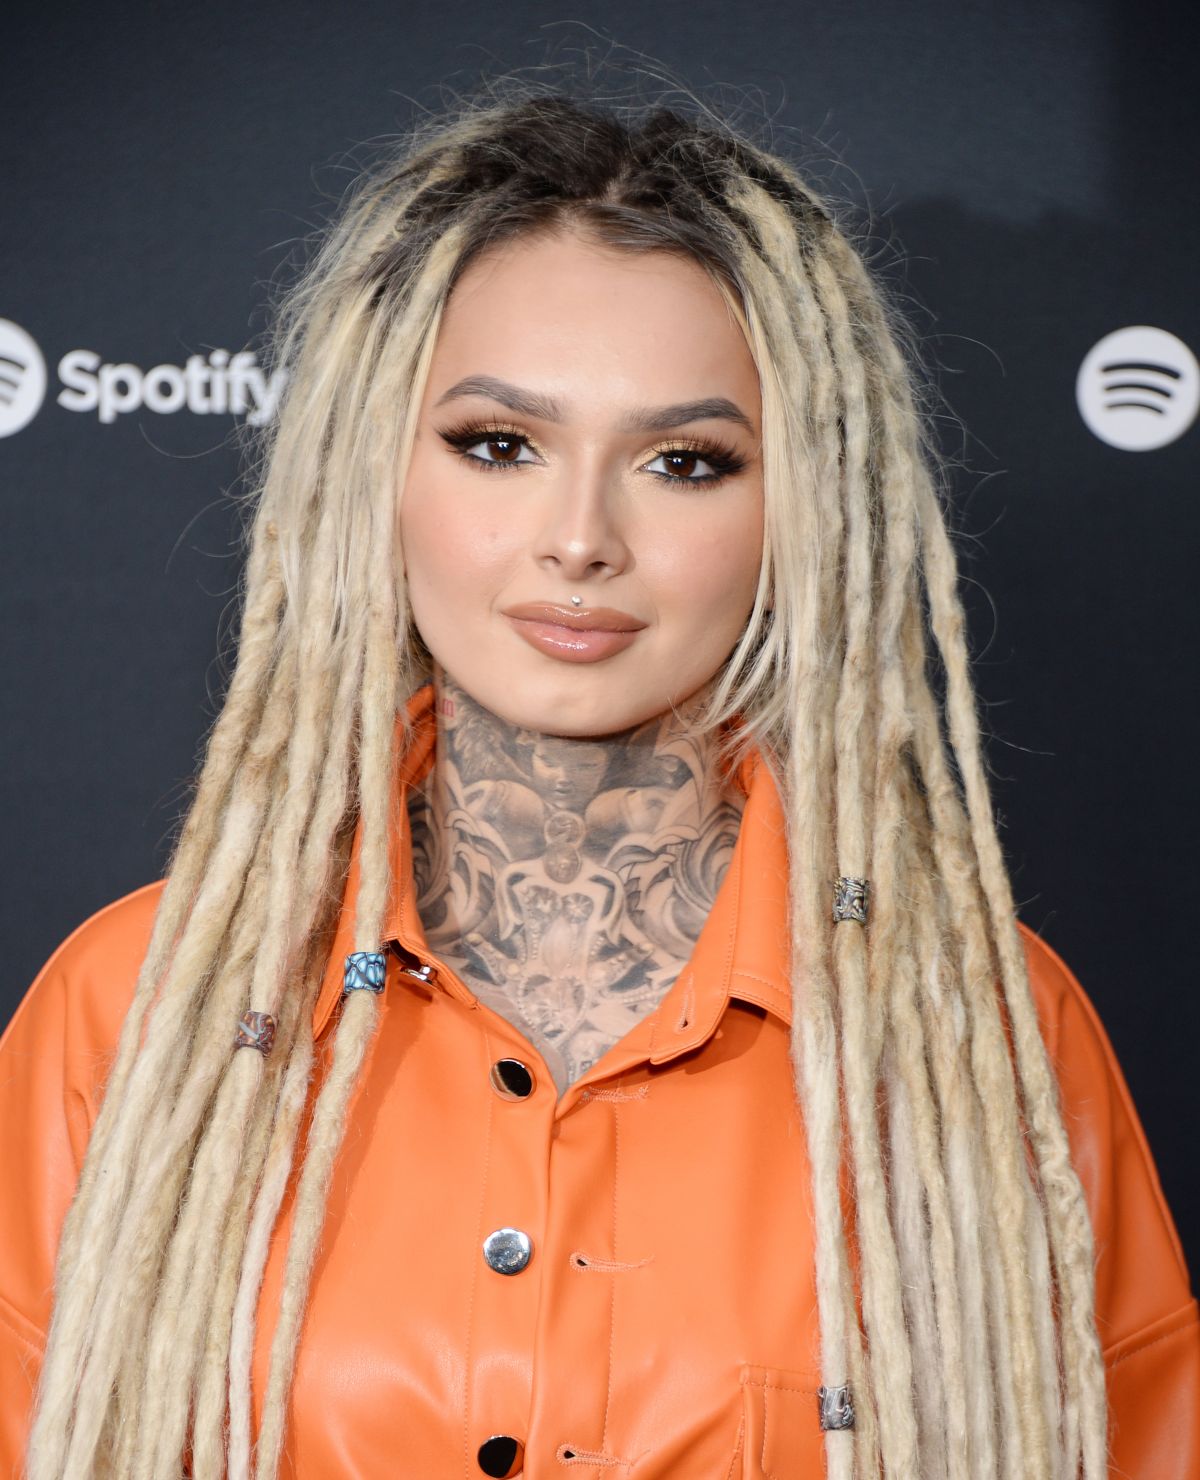 ZHAVIA at Spotify Hosts Best New Artist Party in Los Angeles 01/23/2020.